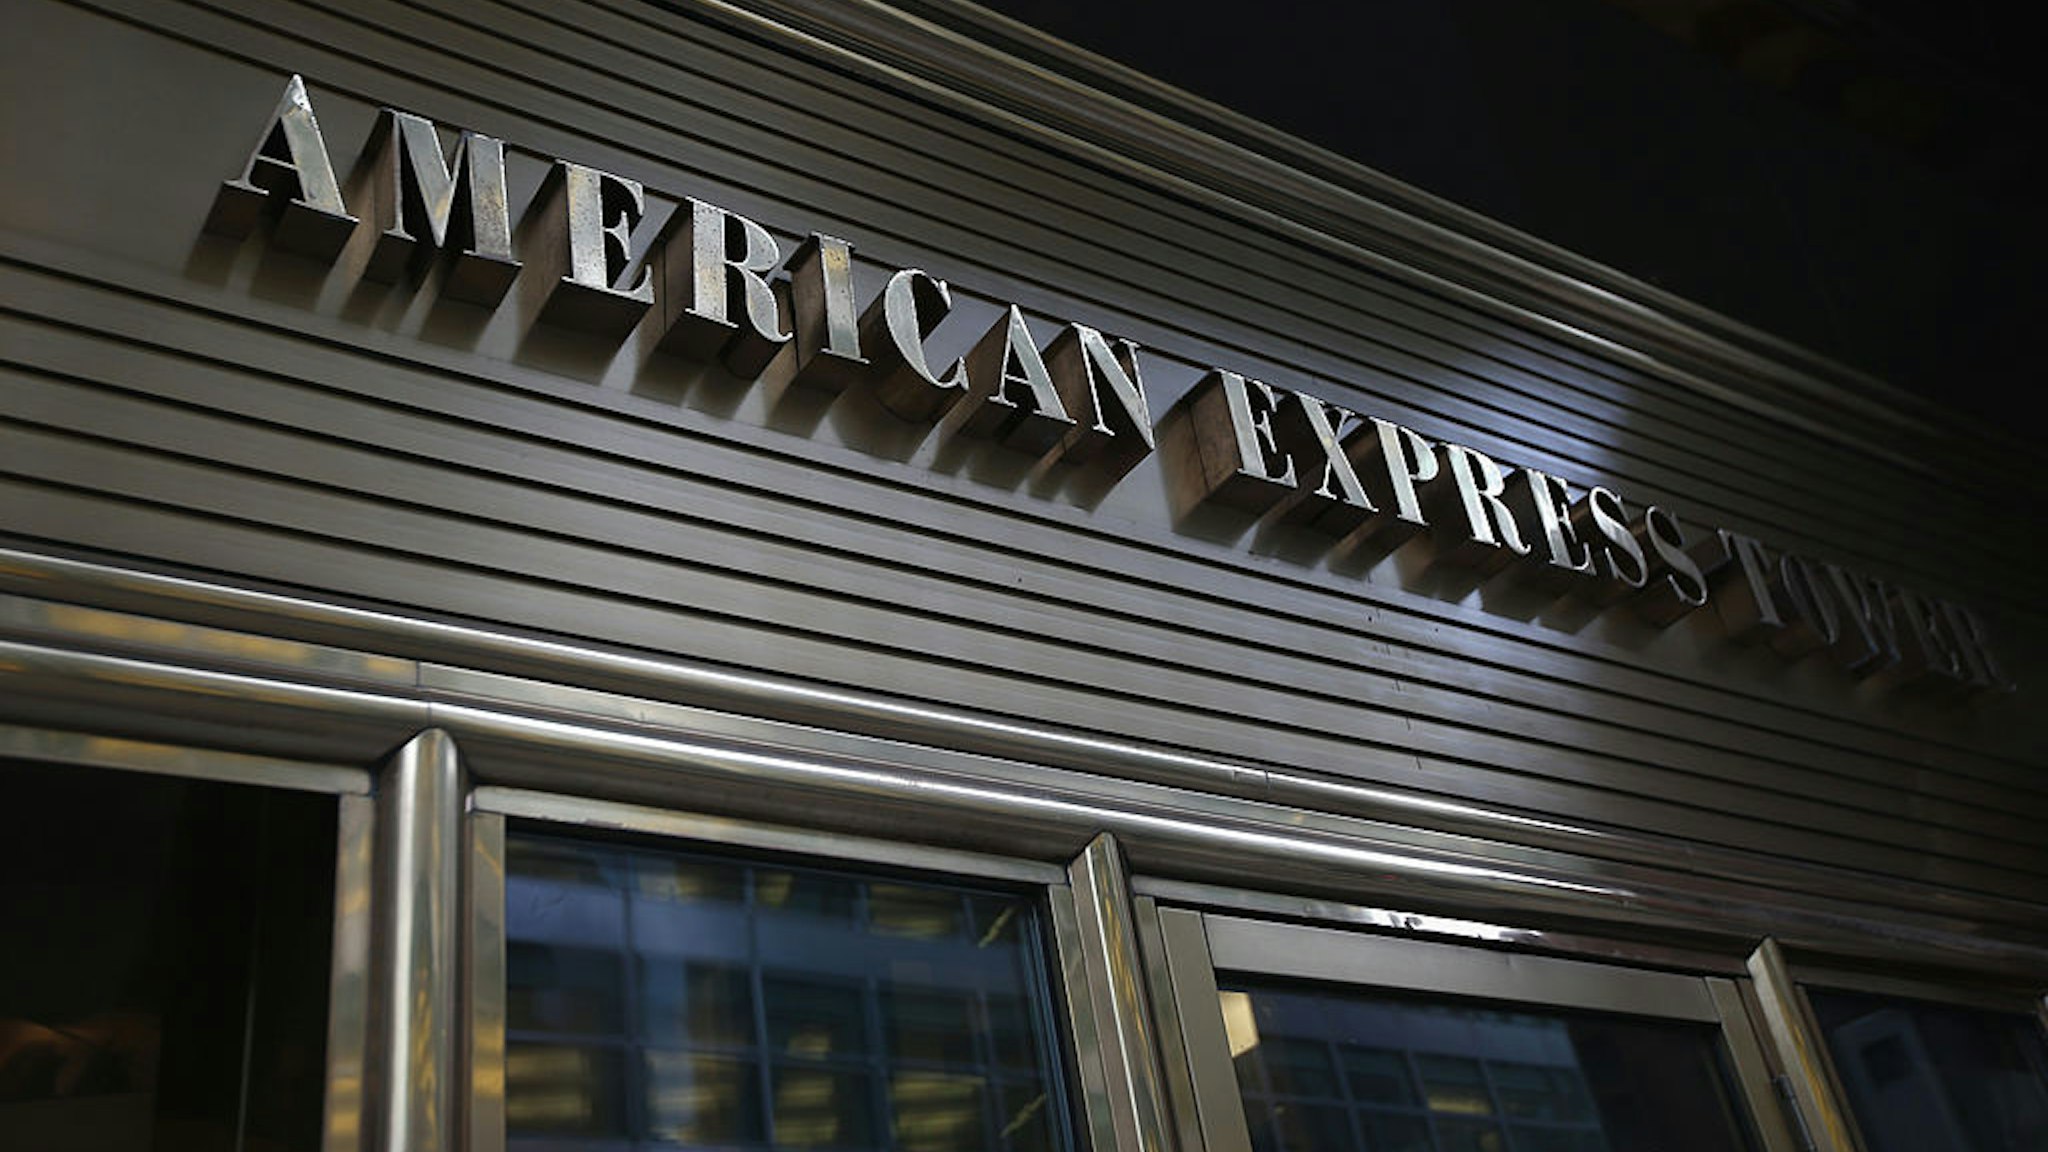 NEW YORK, NY - JANUARY 11: The American Express headquarters on January 11, 2013 in New York, New York. Following low fourth quarter earnings, the credit card giant announced plans to cut 5,400 jobs in the coming year.